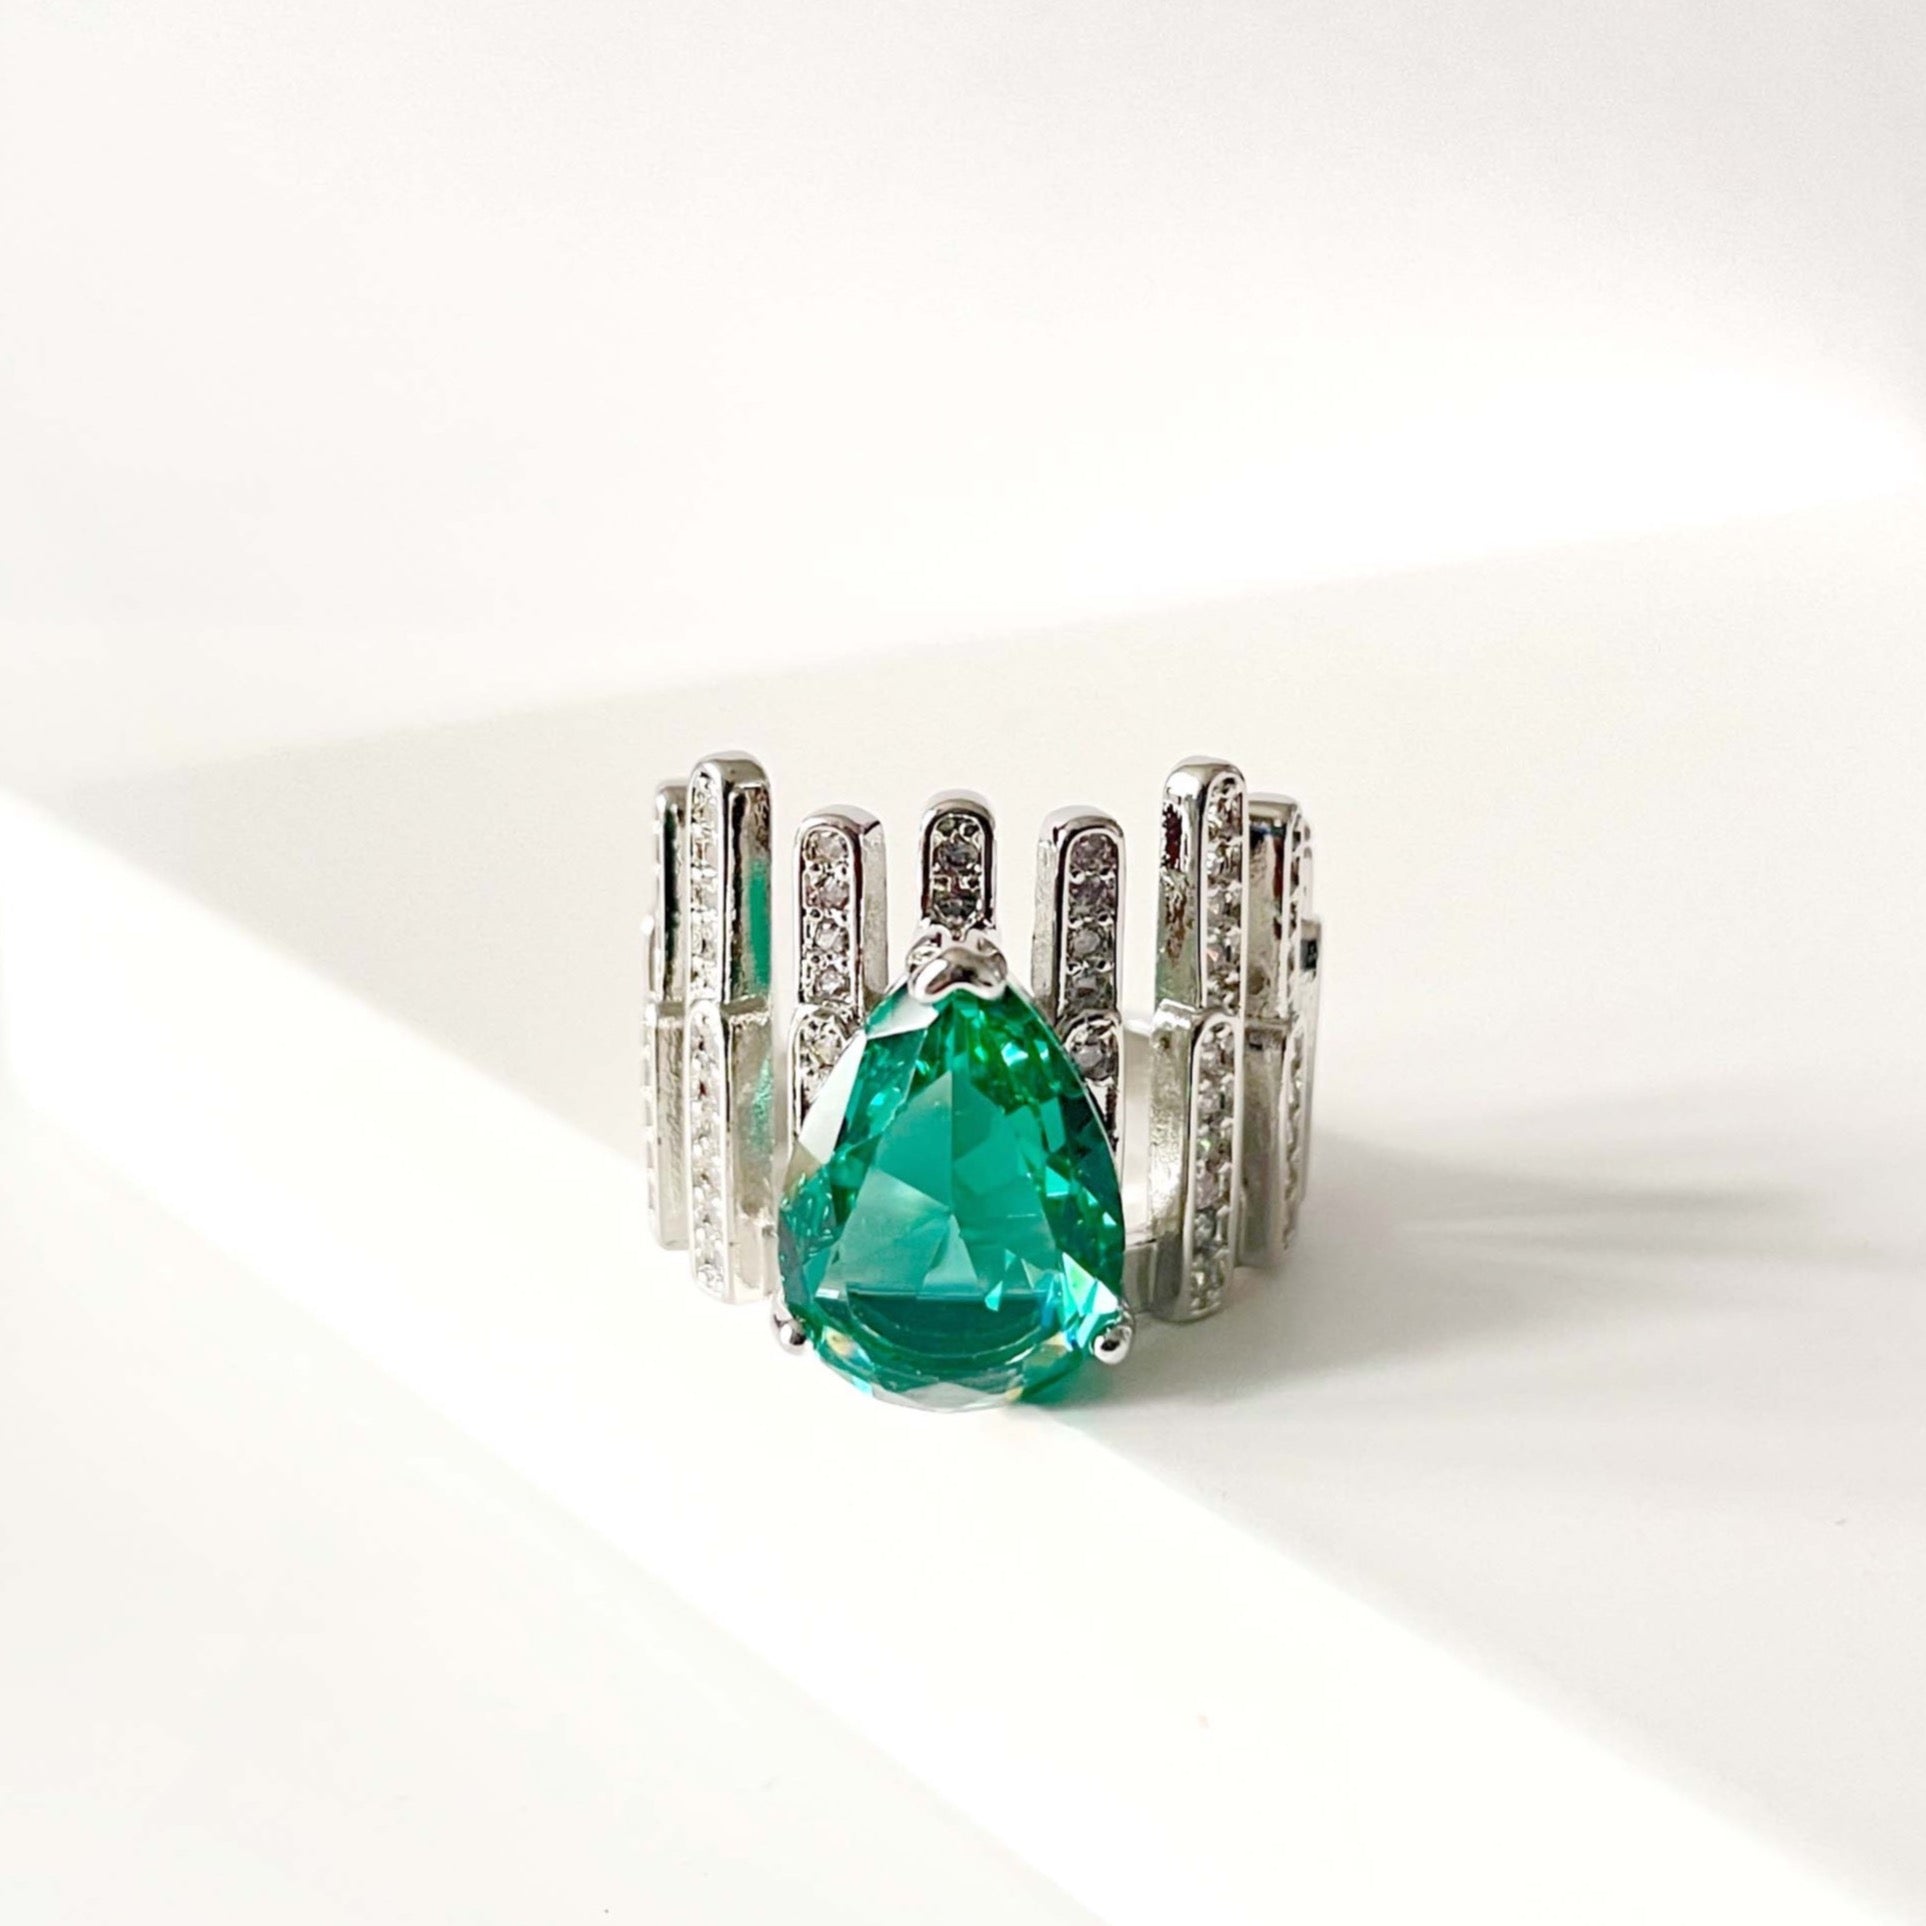 Neela Statement Faceted Jewel Cocktail Ring